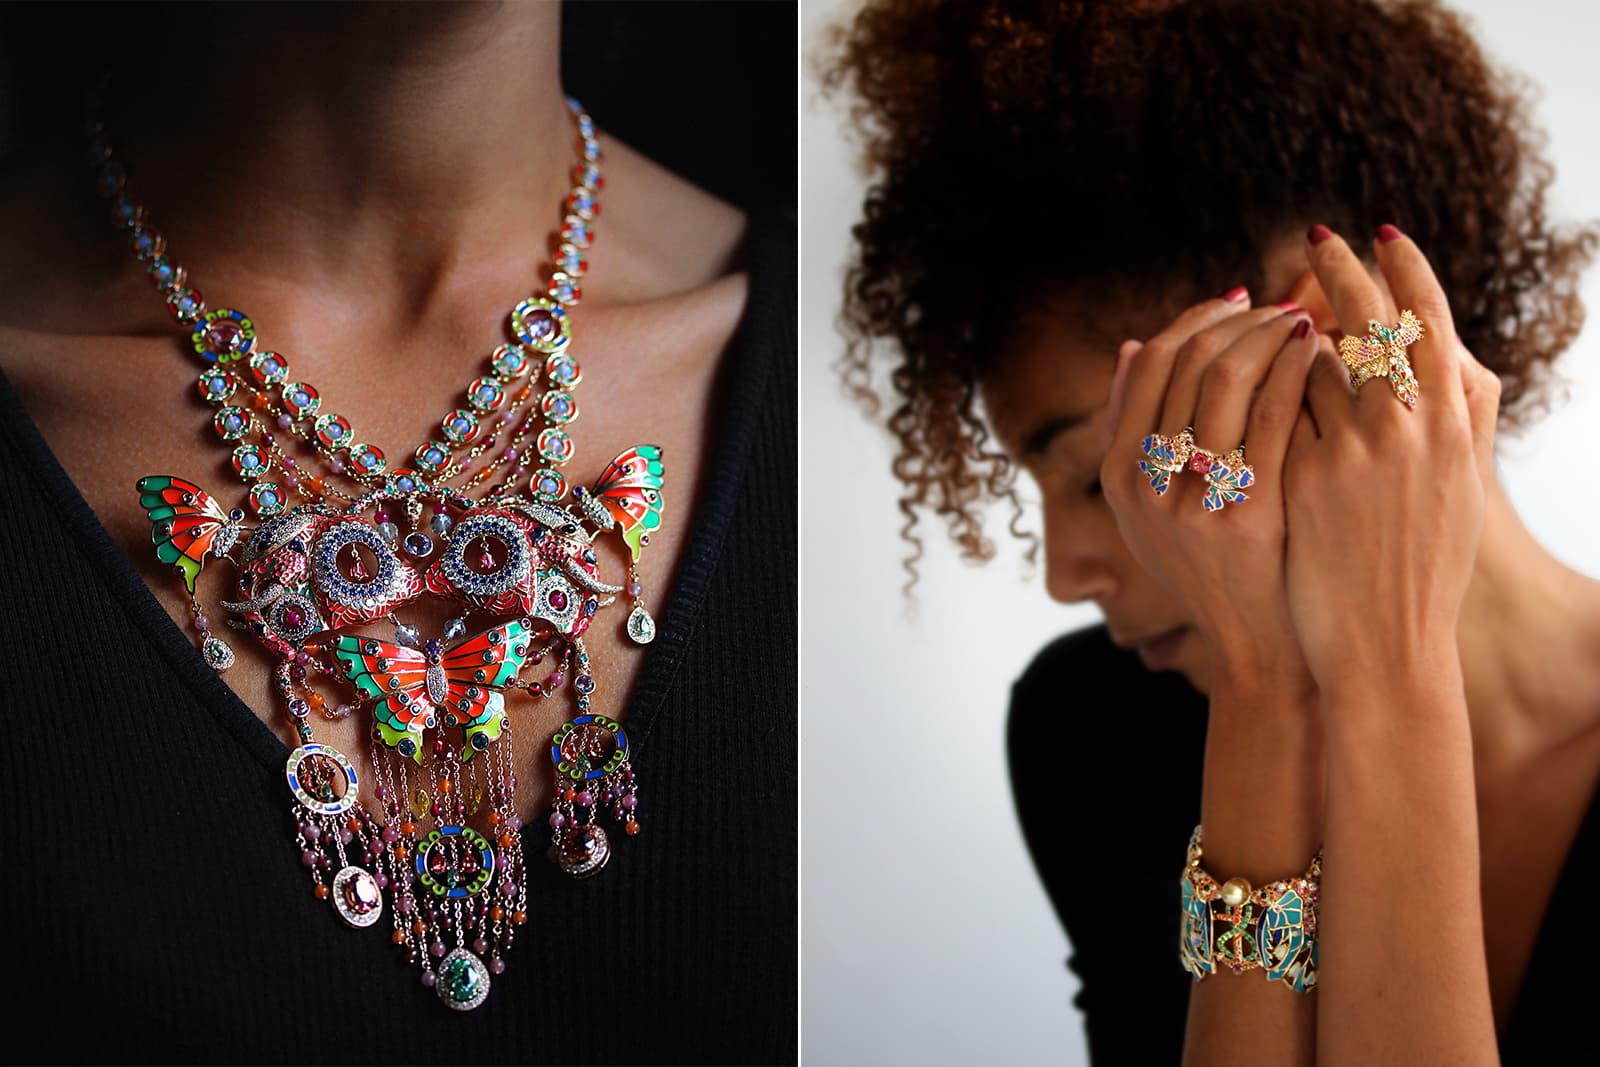 Aude Mathon x Émeline Piot ‘Unique’ collection jewellery including (from left to right) the ‘Nyiama’ necklace, the ‘Pisces’ cuff, the 'Nkùma' ring and the 'Ara' ring